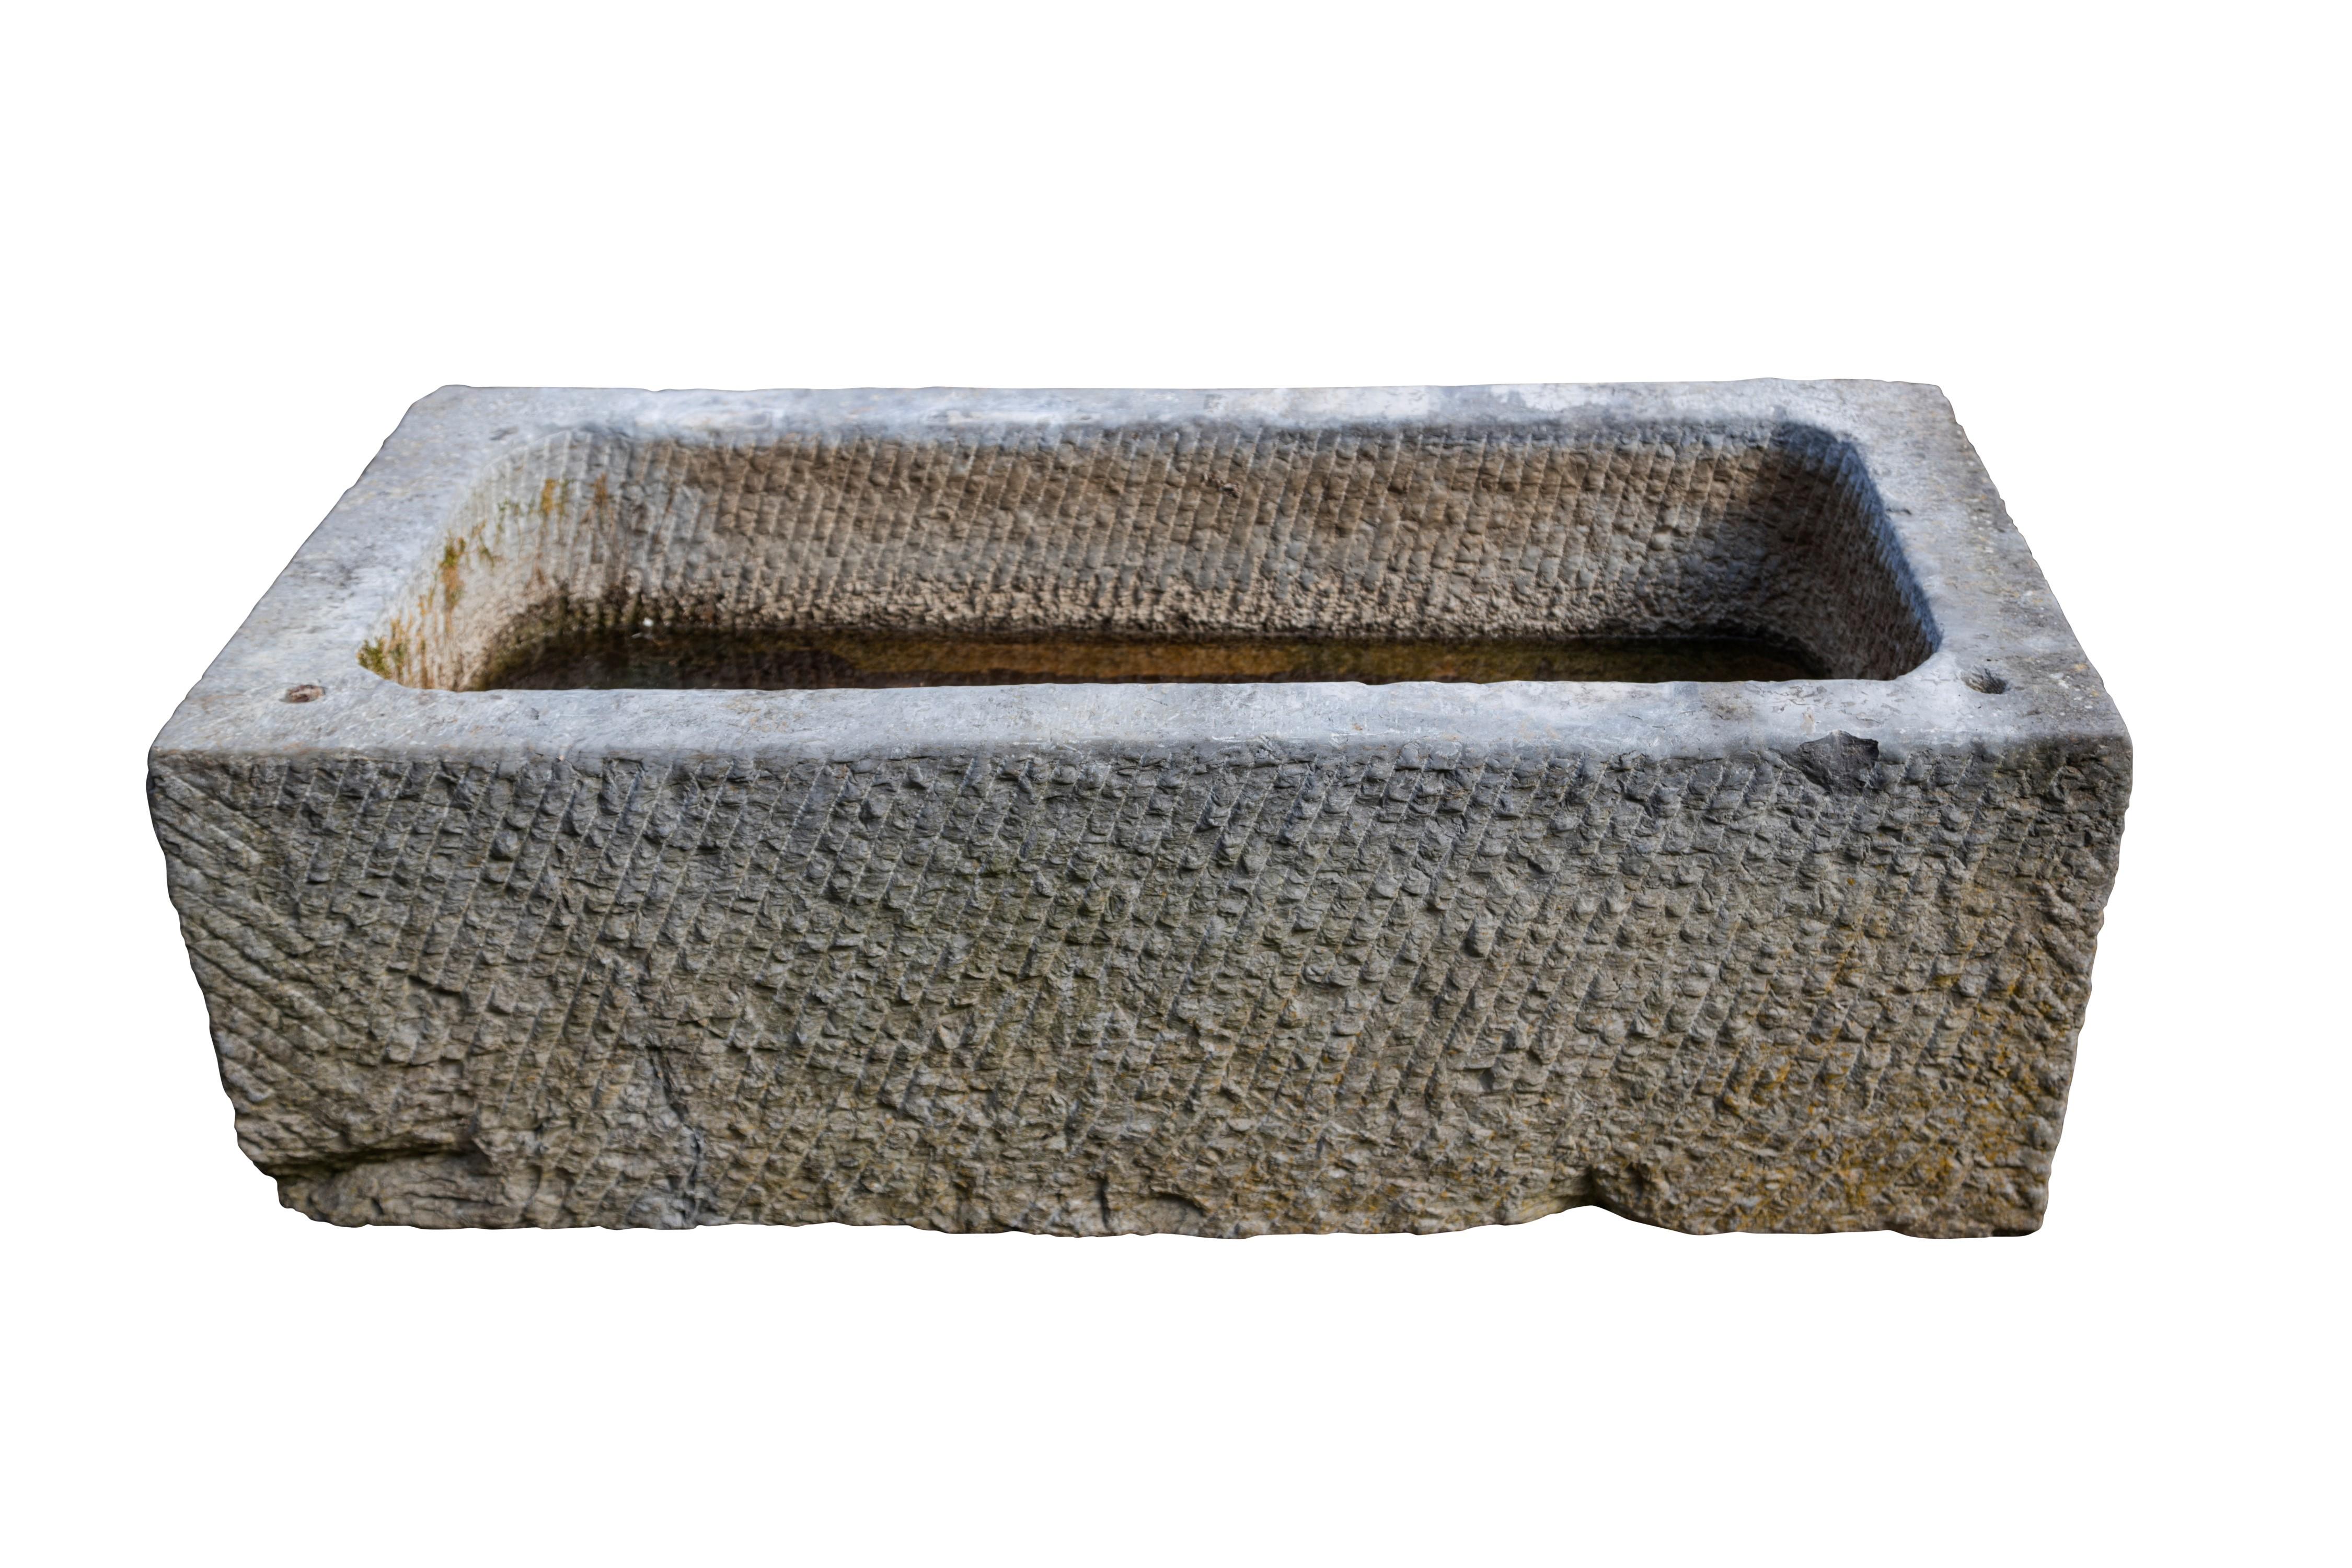 Mid-19th century solid marble bath. Used for washing horse’s feet. To use as a planter, the bath would require drainage holes which can be carried out on site

Weight approximate 350kg.